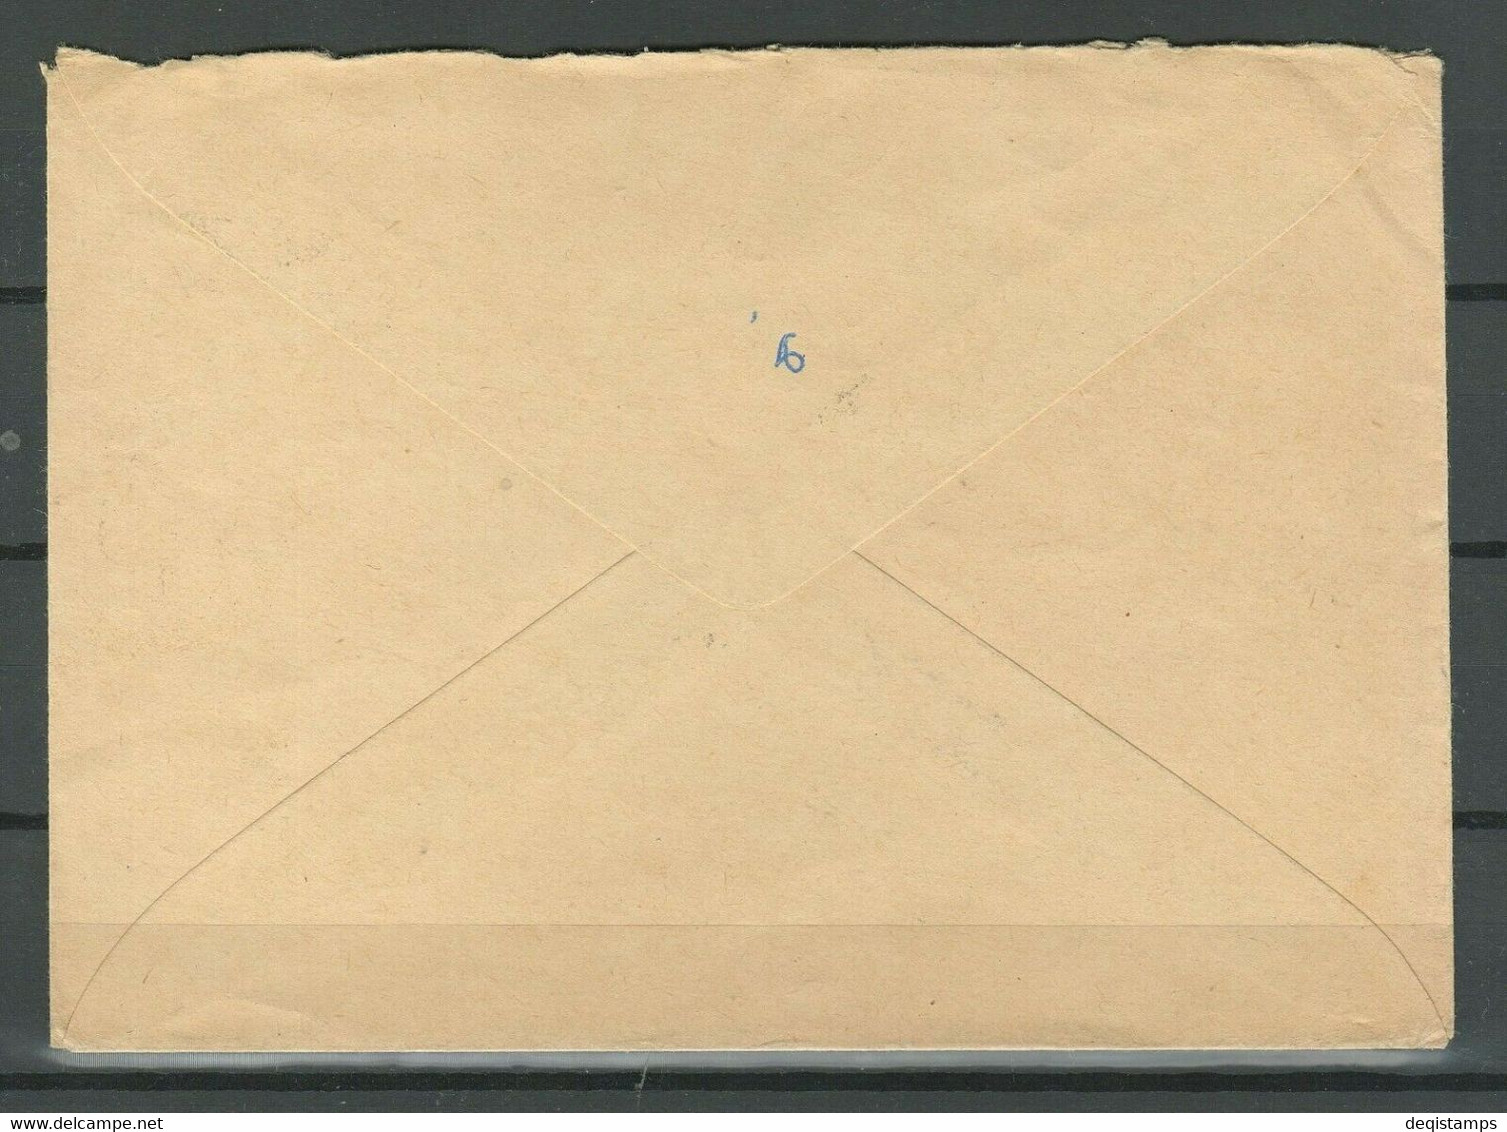 USSR 1956 ☀ Registered Airmail Letter To Germany - Covers & Documents